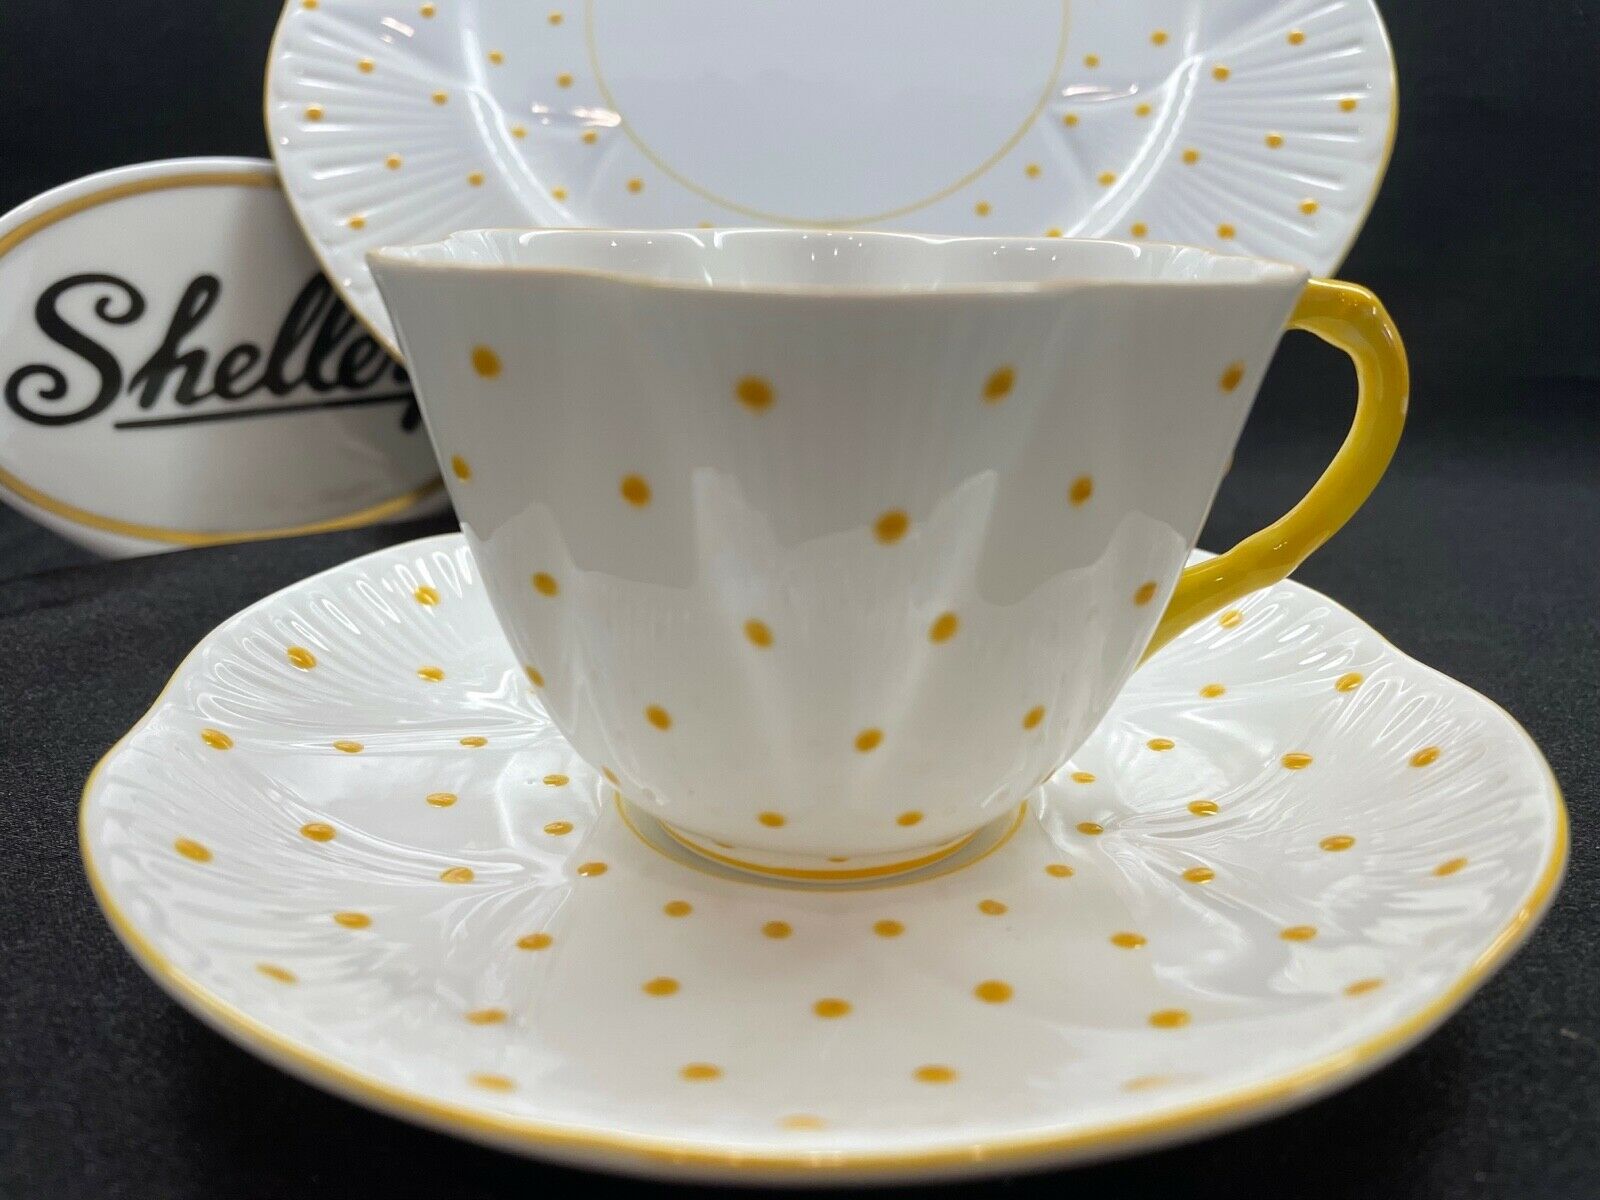 Shelley  Dainty Yellow  Polka Dots  Cup,  Saucer  And  8" Plate  # 13748/y